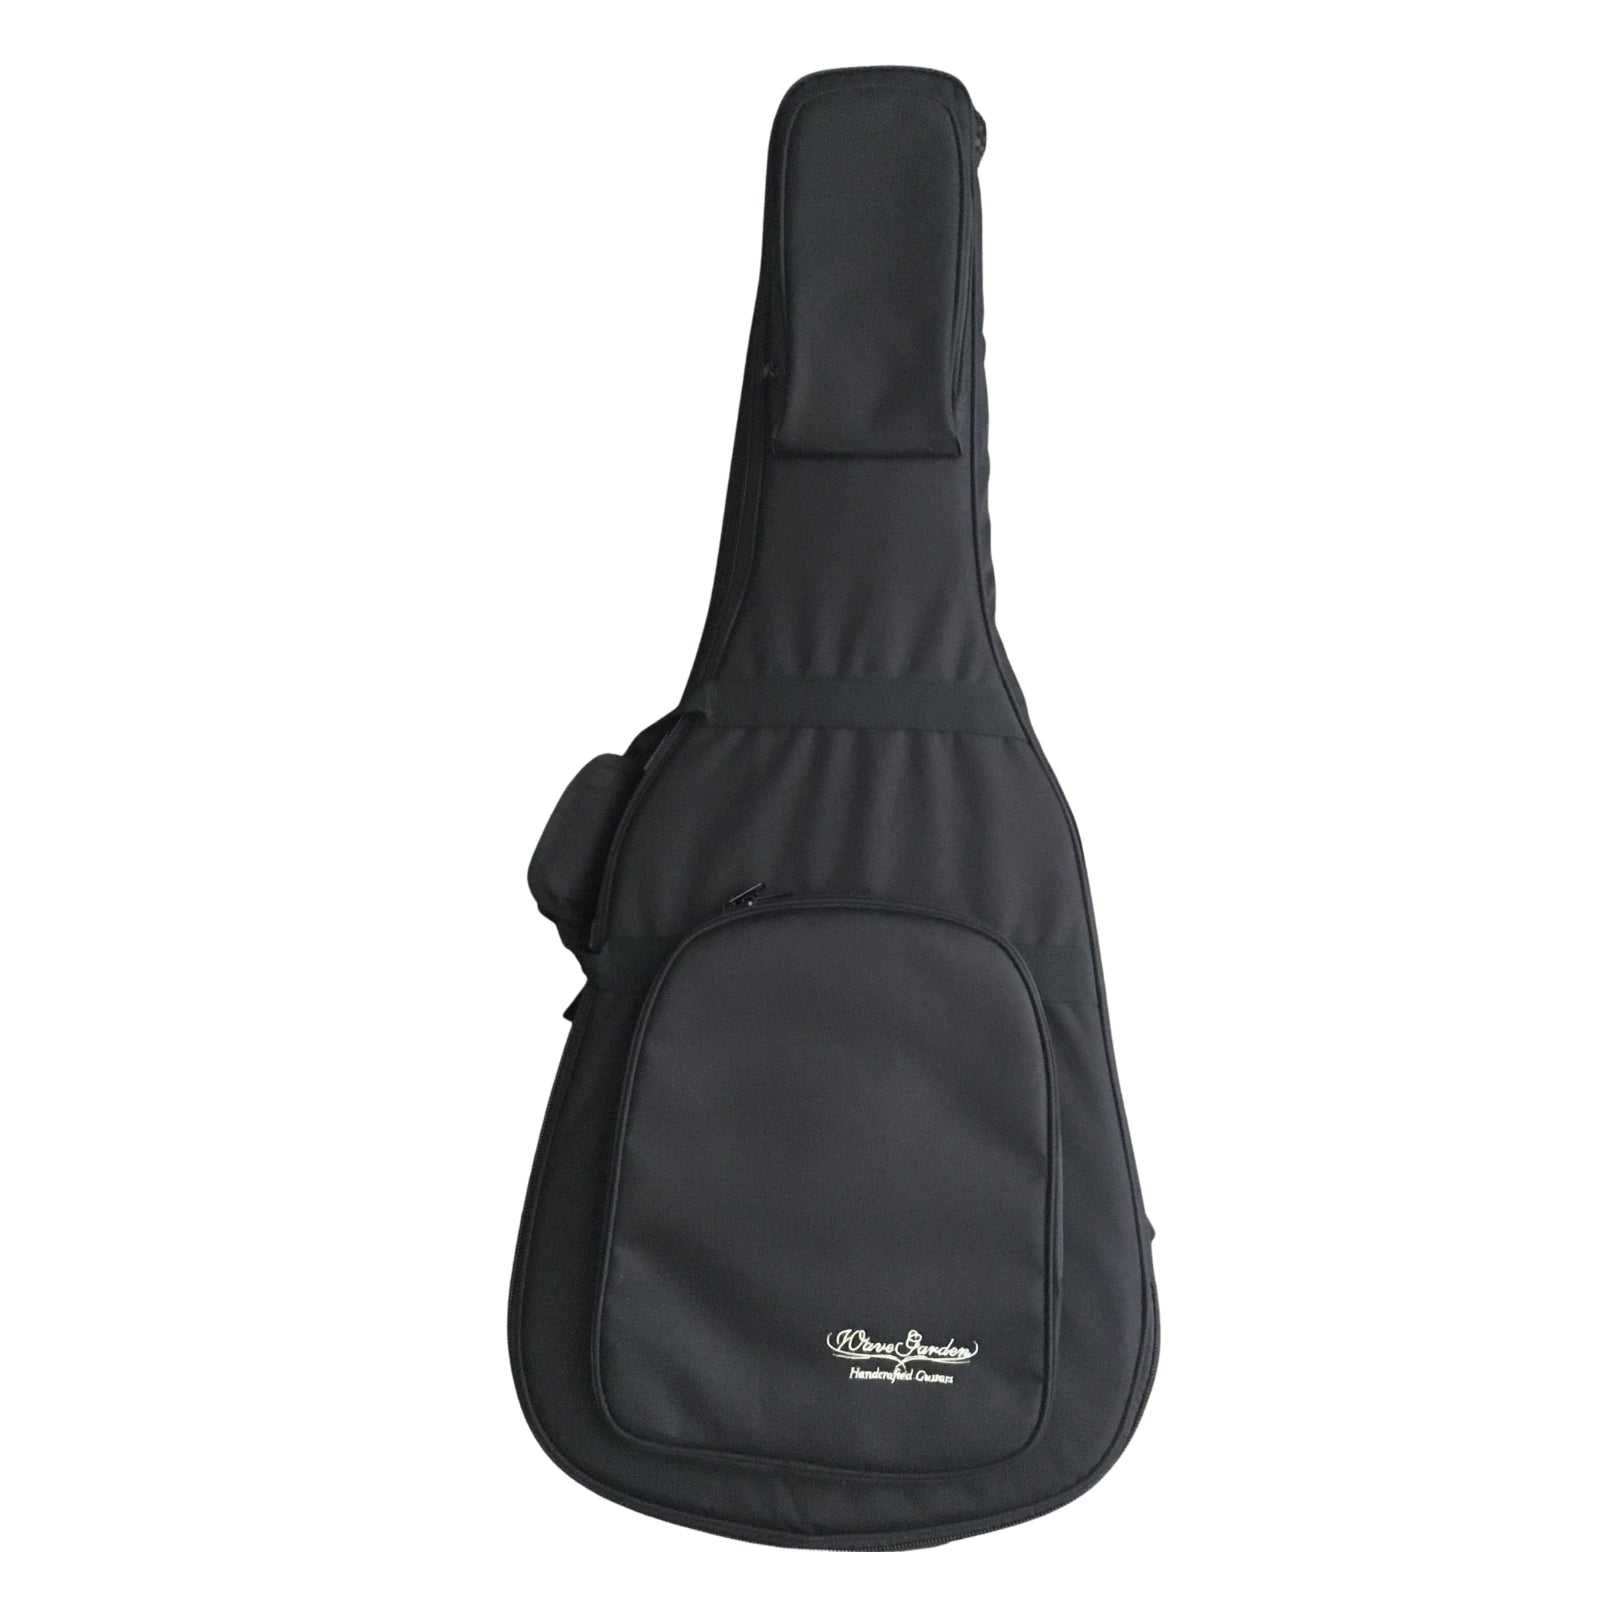 Wavegarden WG-260OM Acoustic Guitar Top Solid with Gig Bag& Accessories